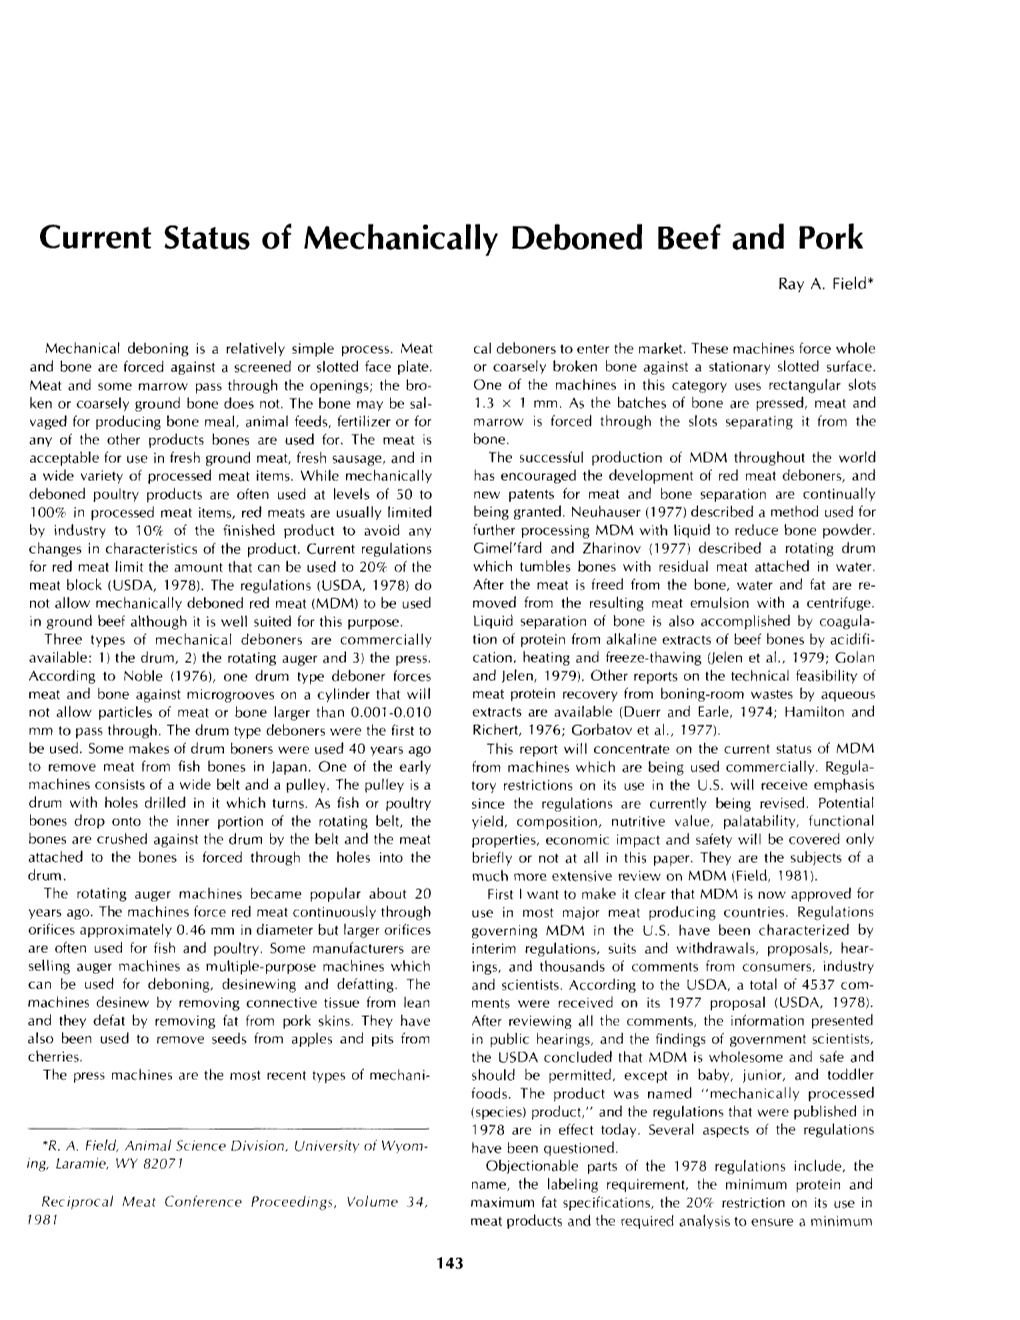 Current Status of Mechanically Deboned Beef and Pork